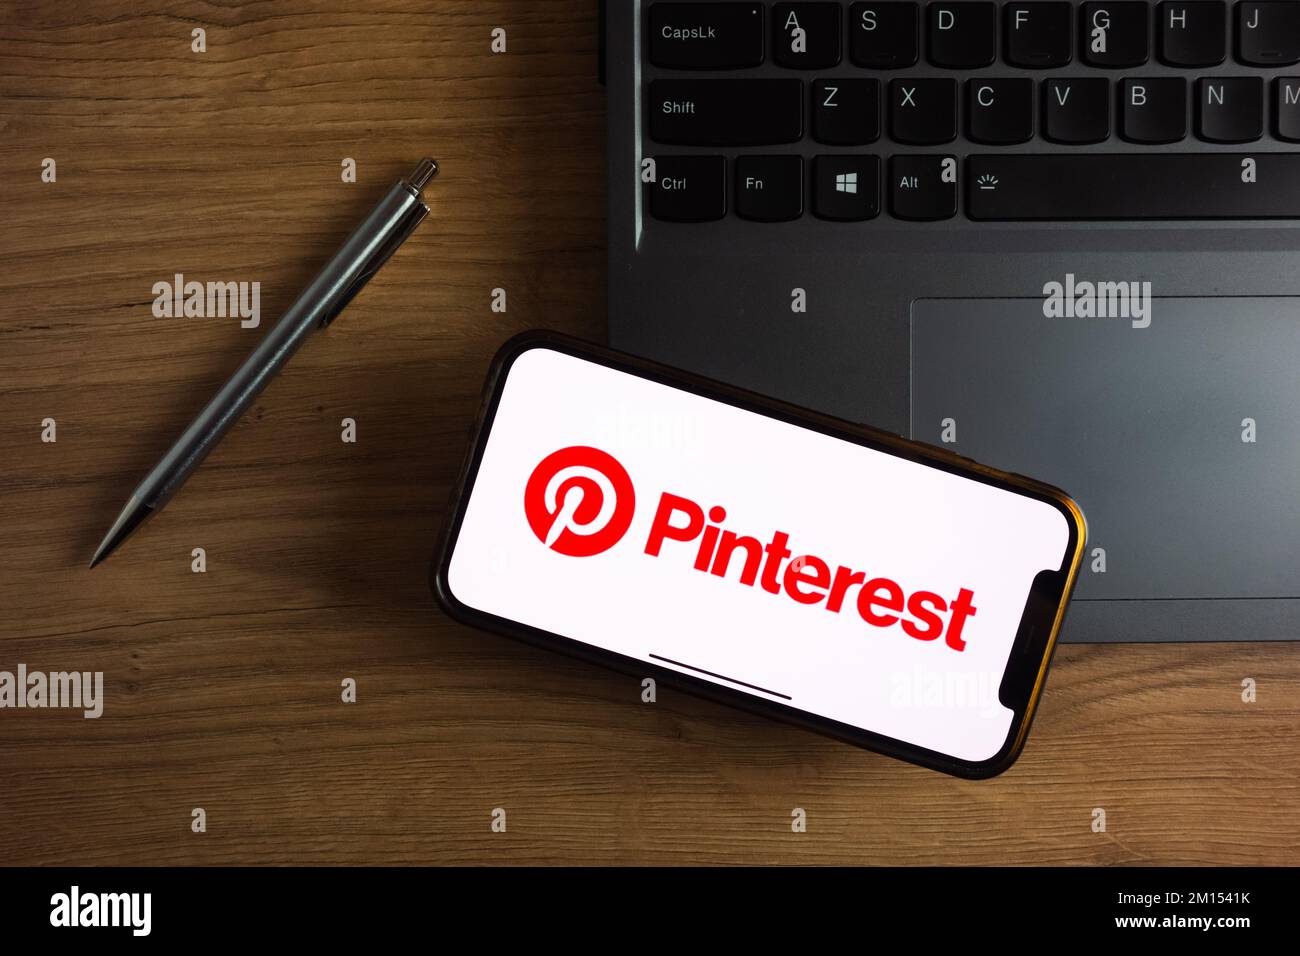 KONSKIE, POLAND - September 17, 2022: Pinterest logo displayed on smartphone screen in the office. Pinterest is an internet photo sharing and publishi Stock Photo